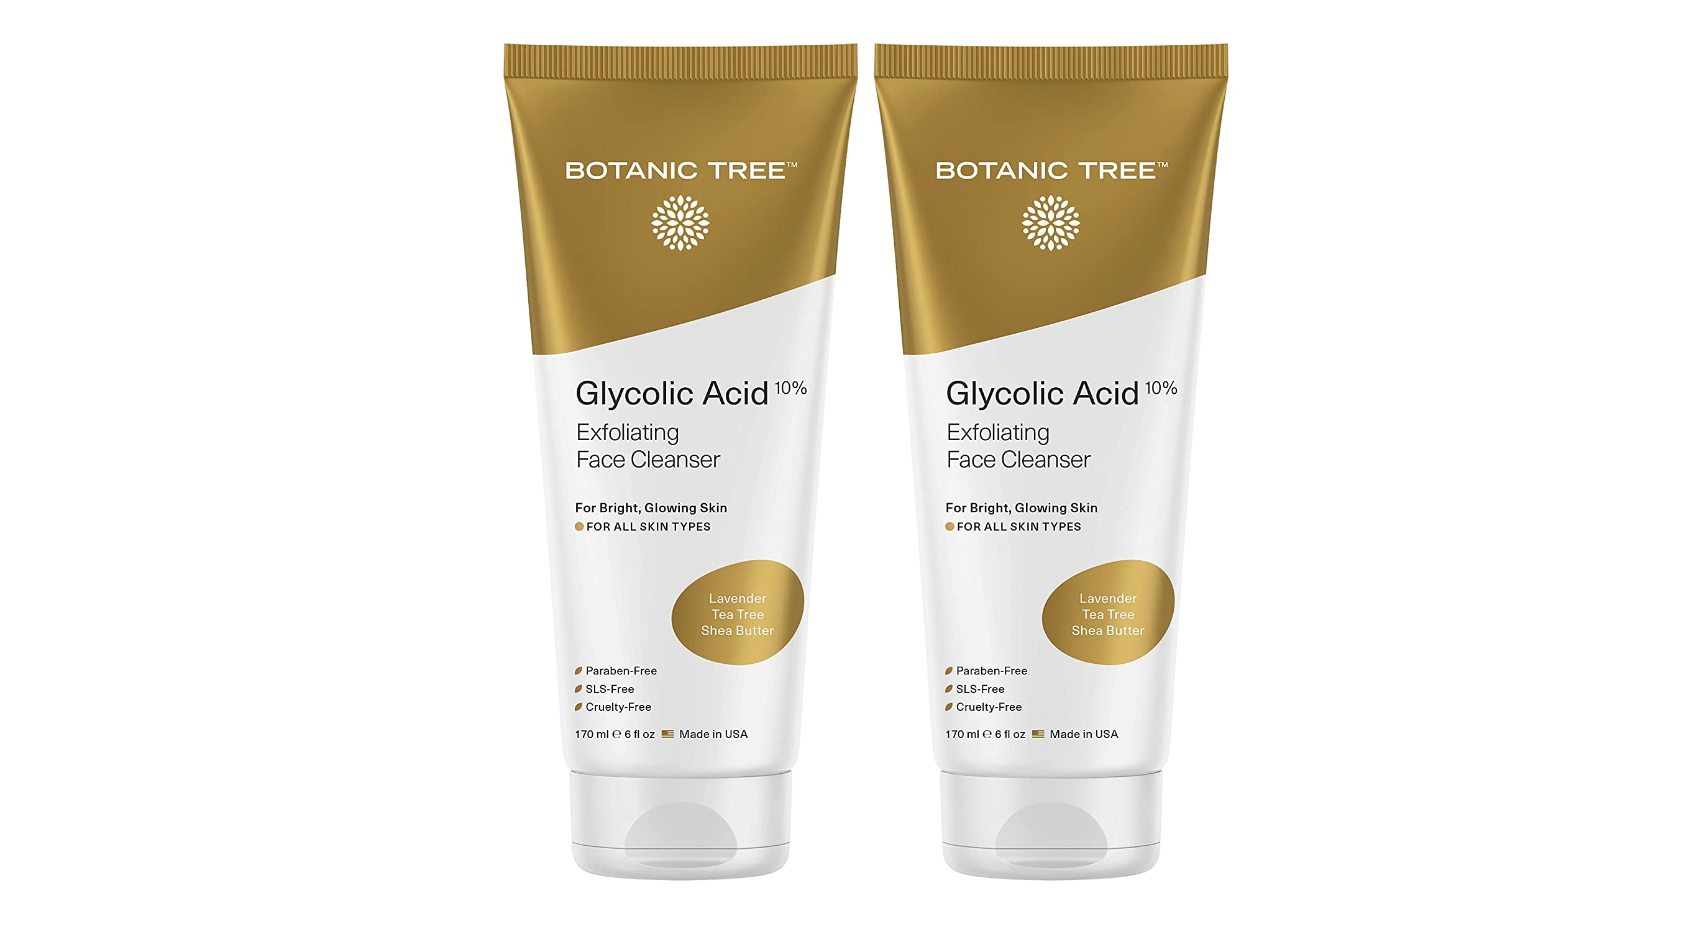 Two tubes of the exfoliating facial cleanser